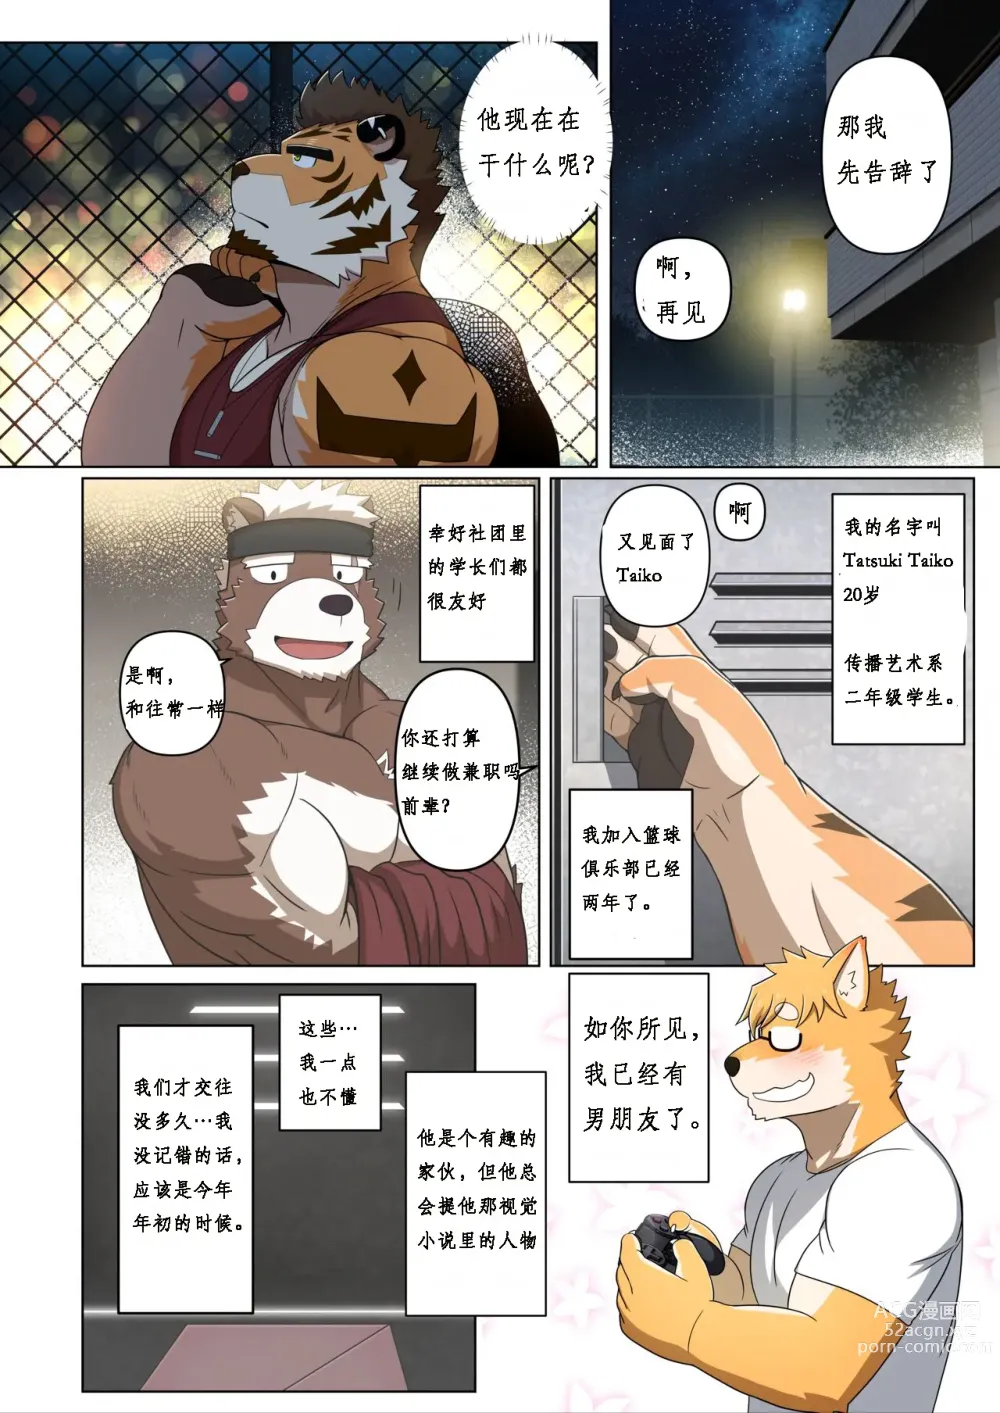 Page 7 of doujinshi 甜蜜陷阱 [Chinese］(Ongoing)【工口译制】